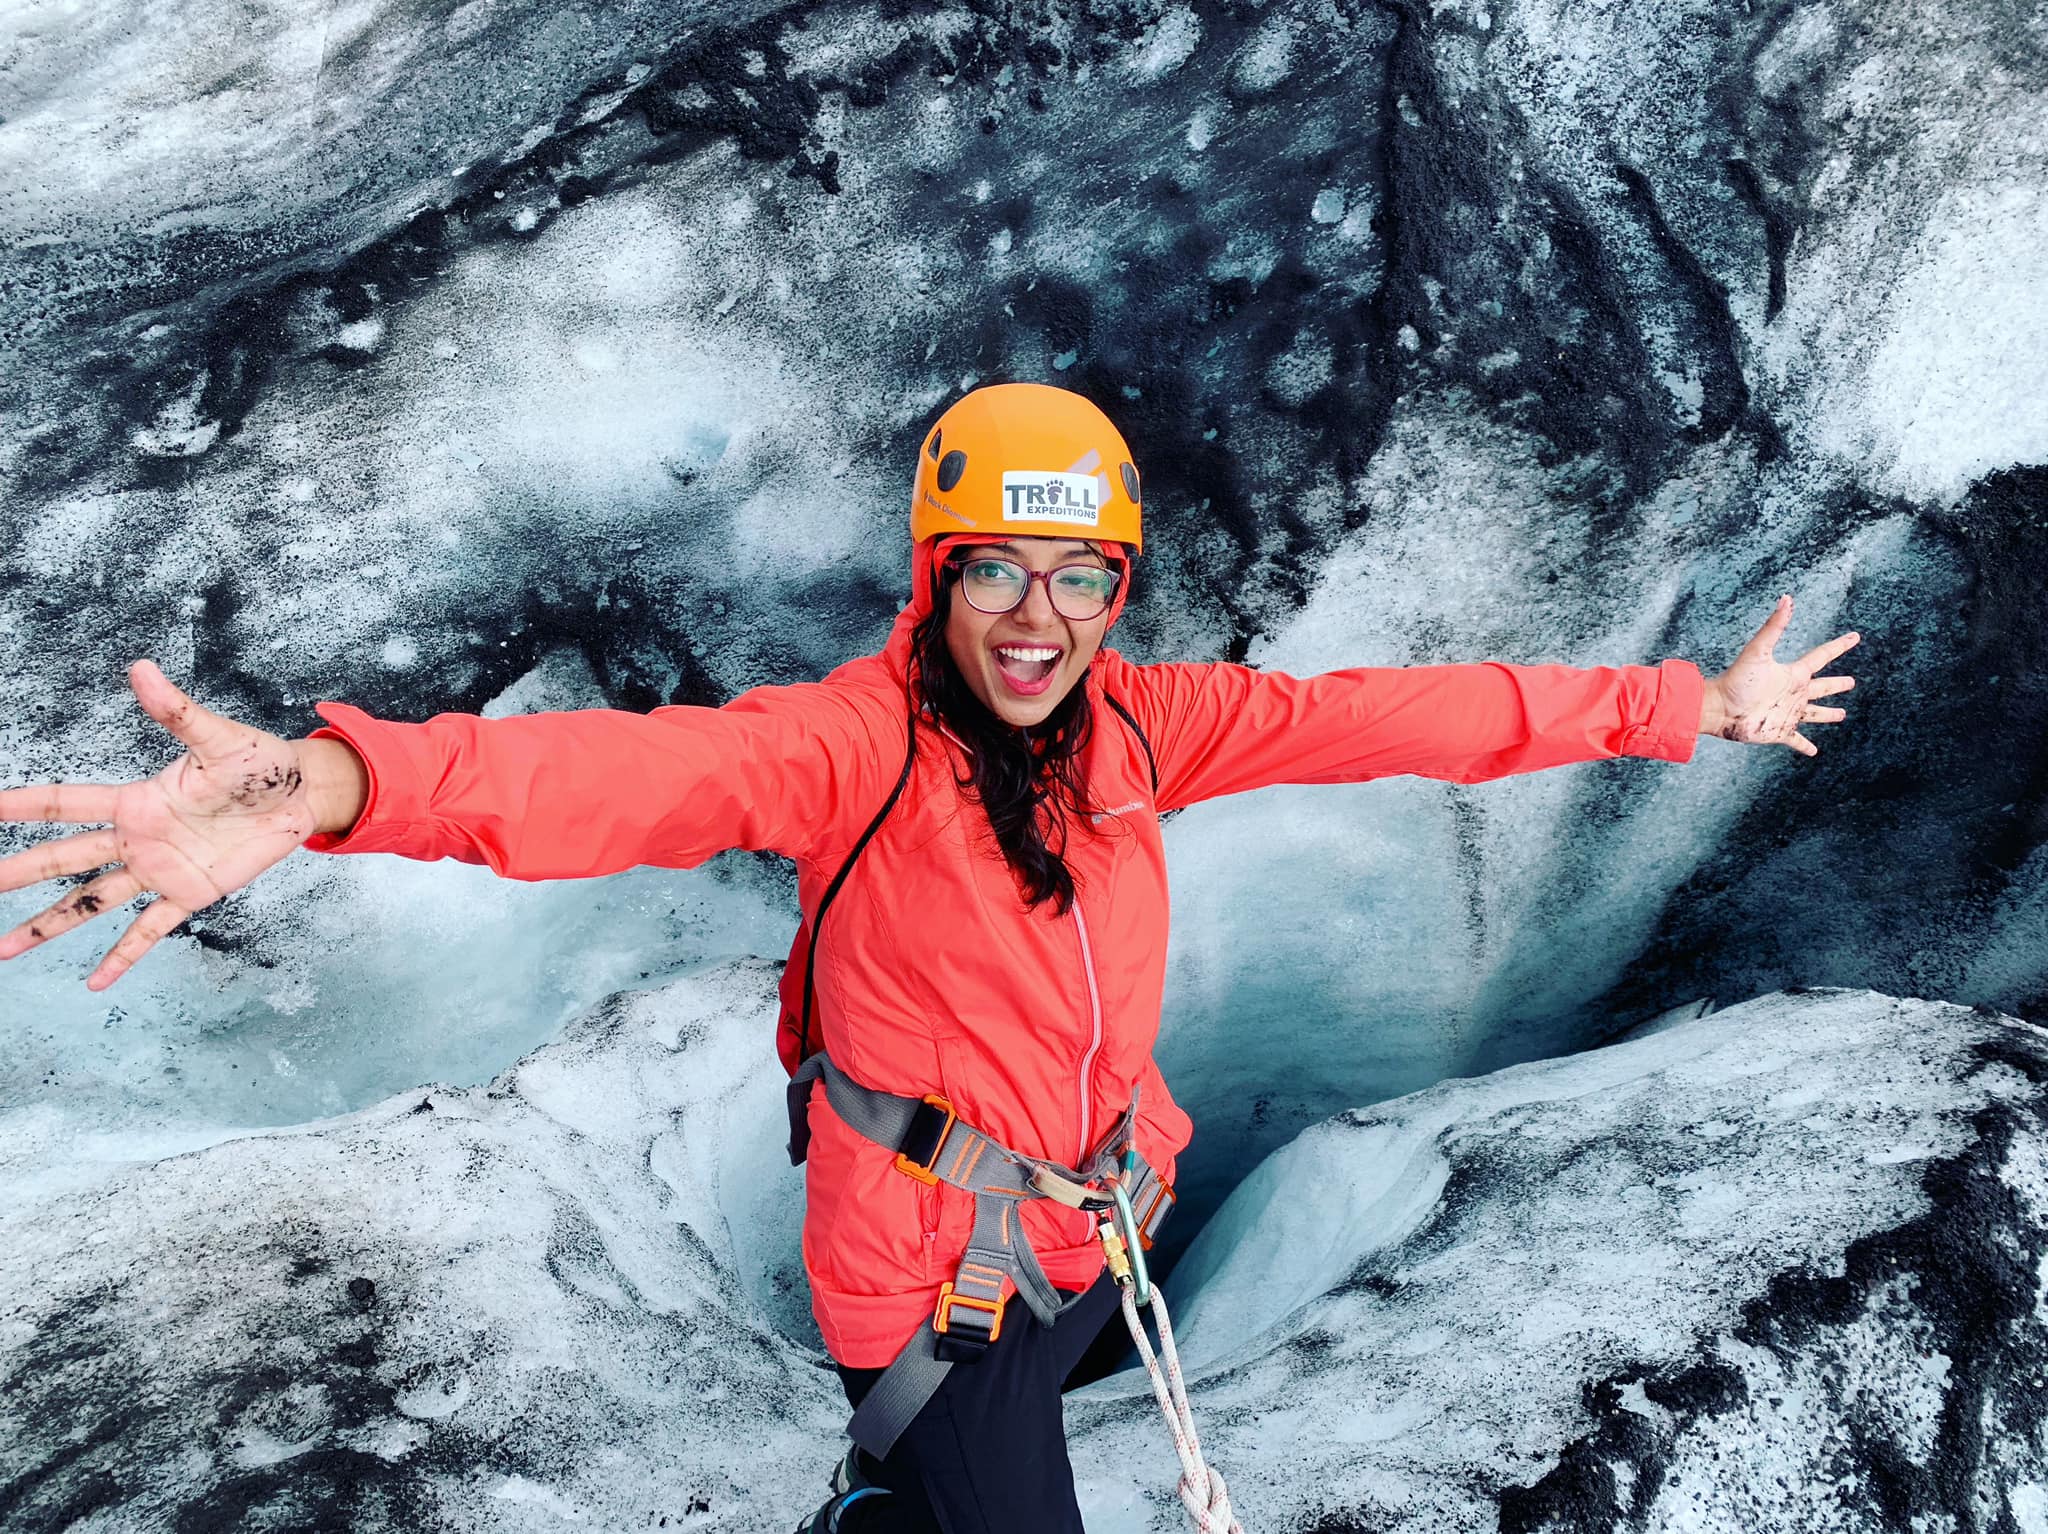 Maitraye is smiling at the camera while hanging near a crevasse in Solheimajokull glacier, Iceland